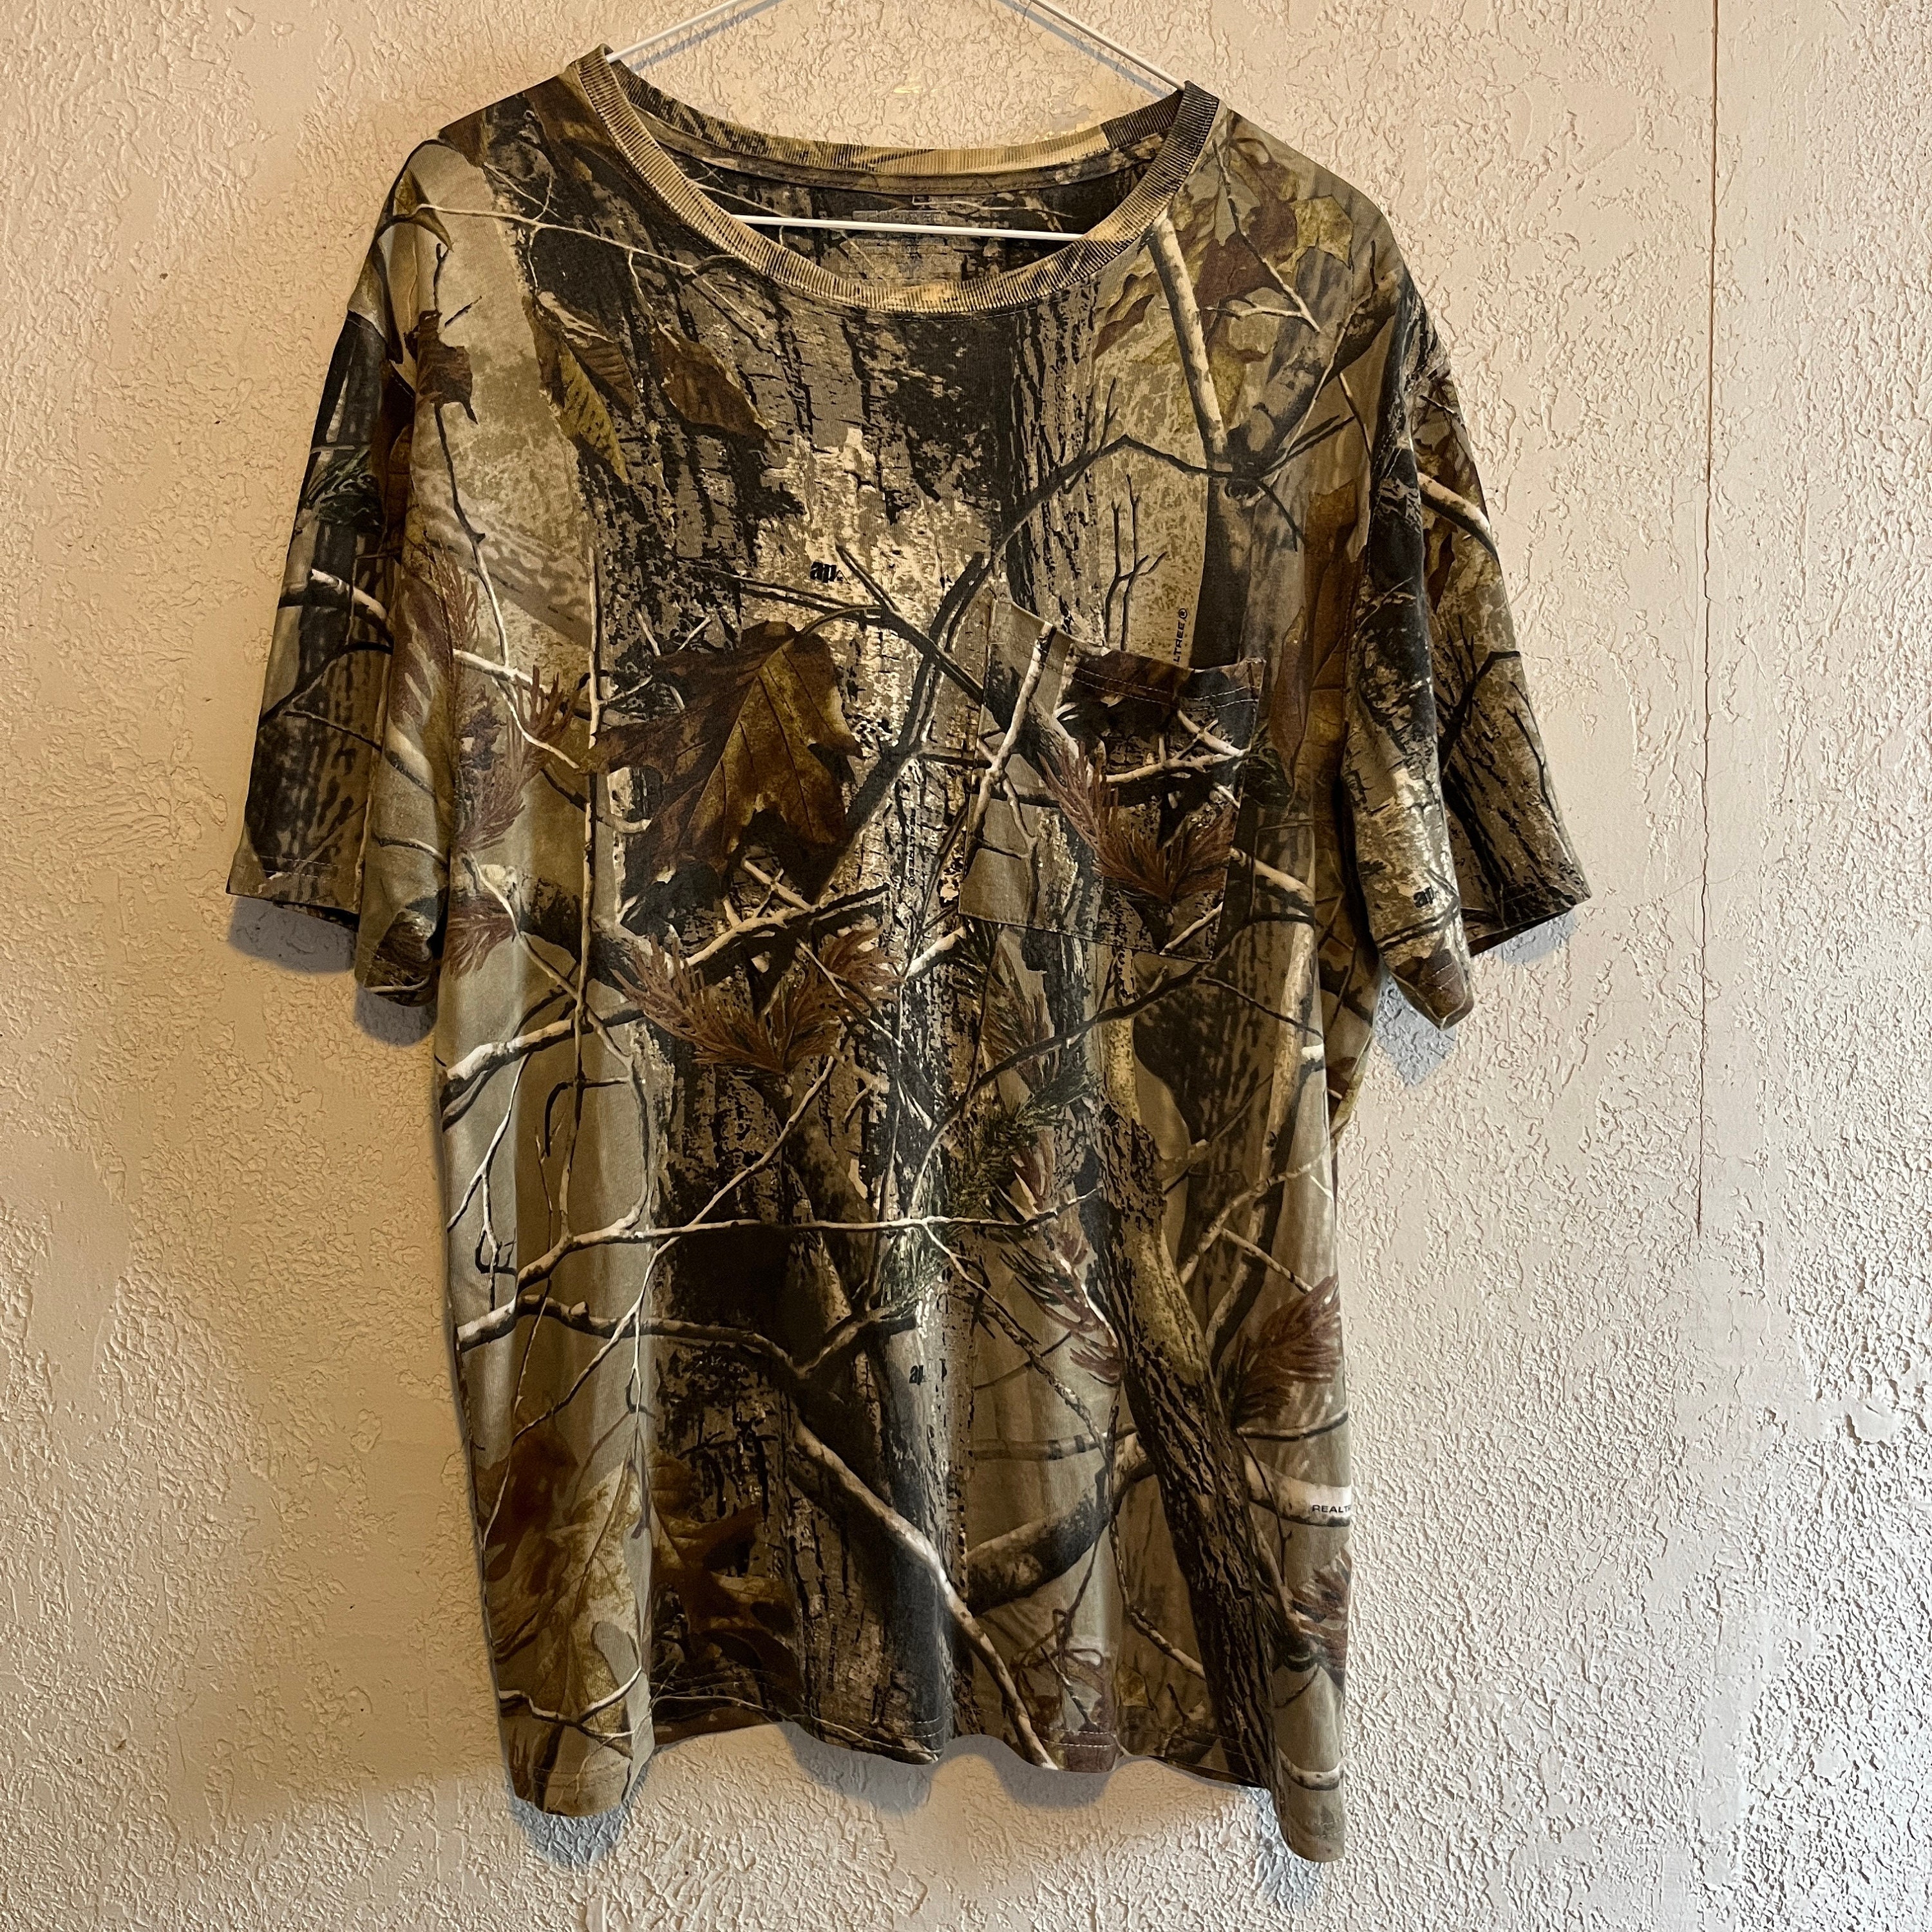 Blank Camouflage Shirts Matching Blank Camo T-shirts for Heat